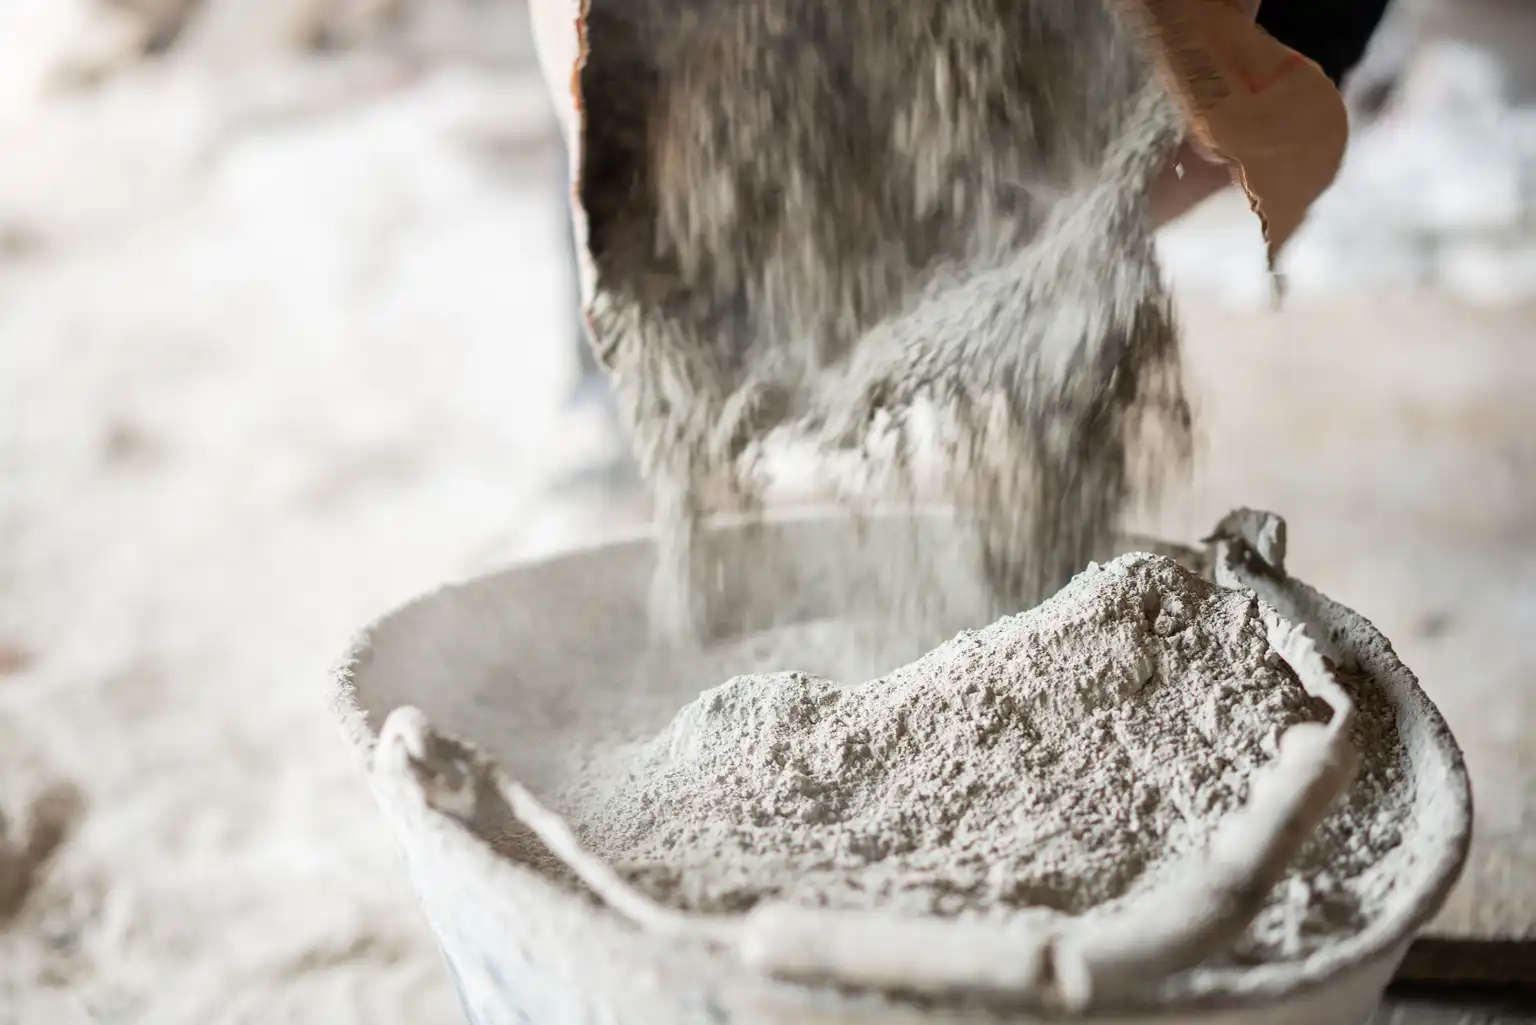 Eagle Materials Stock: New Home Sales And Cement Imports Bolstering Outlook - Seeking Alpha